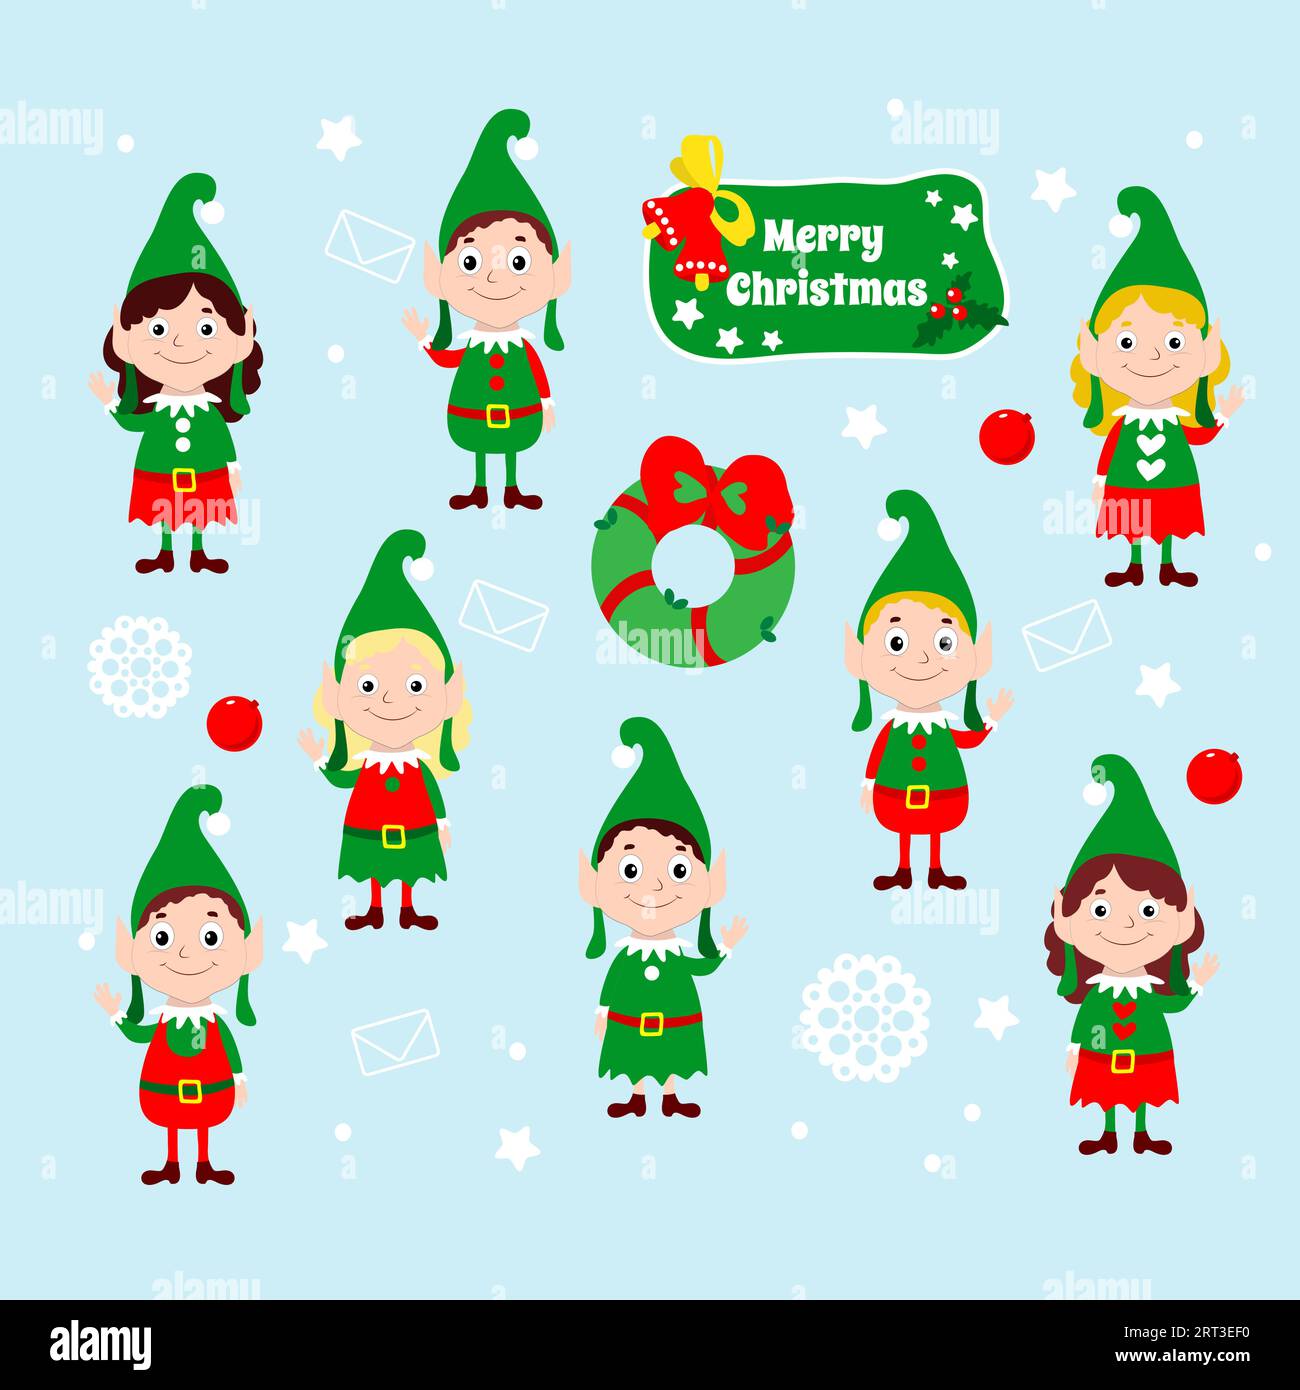 Set of Christmas happy elves. Santa claus helpers wave their hands and smile. Festive vector illustration of winter cartoon characters. Stock Vector